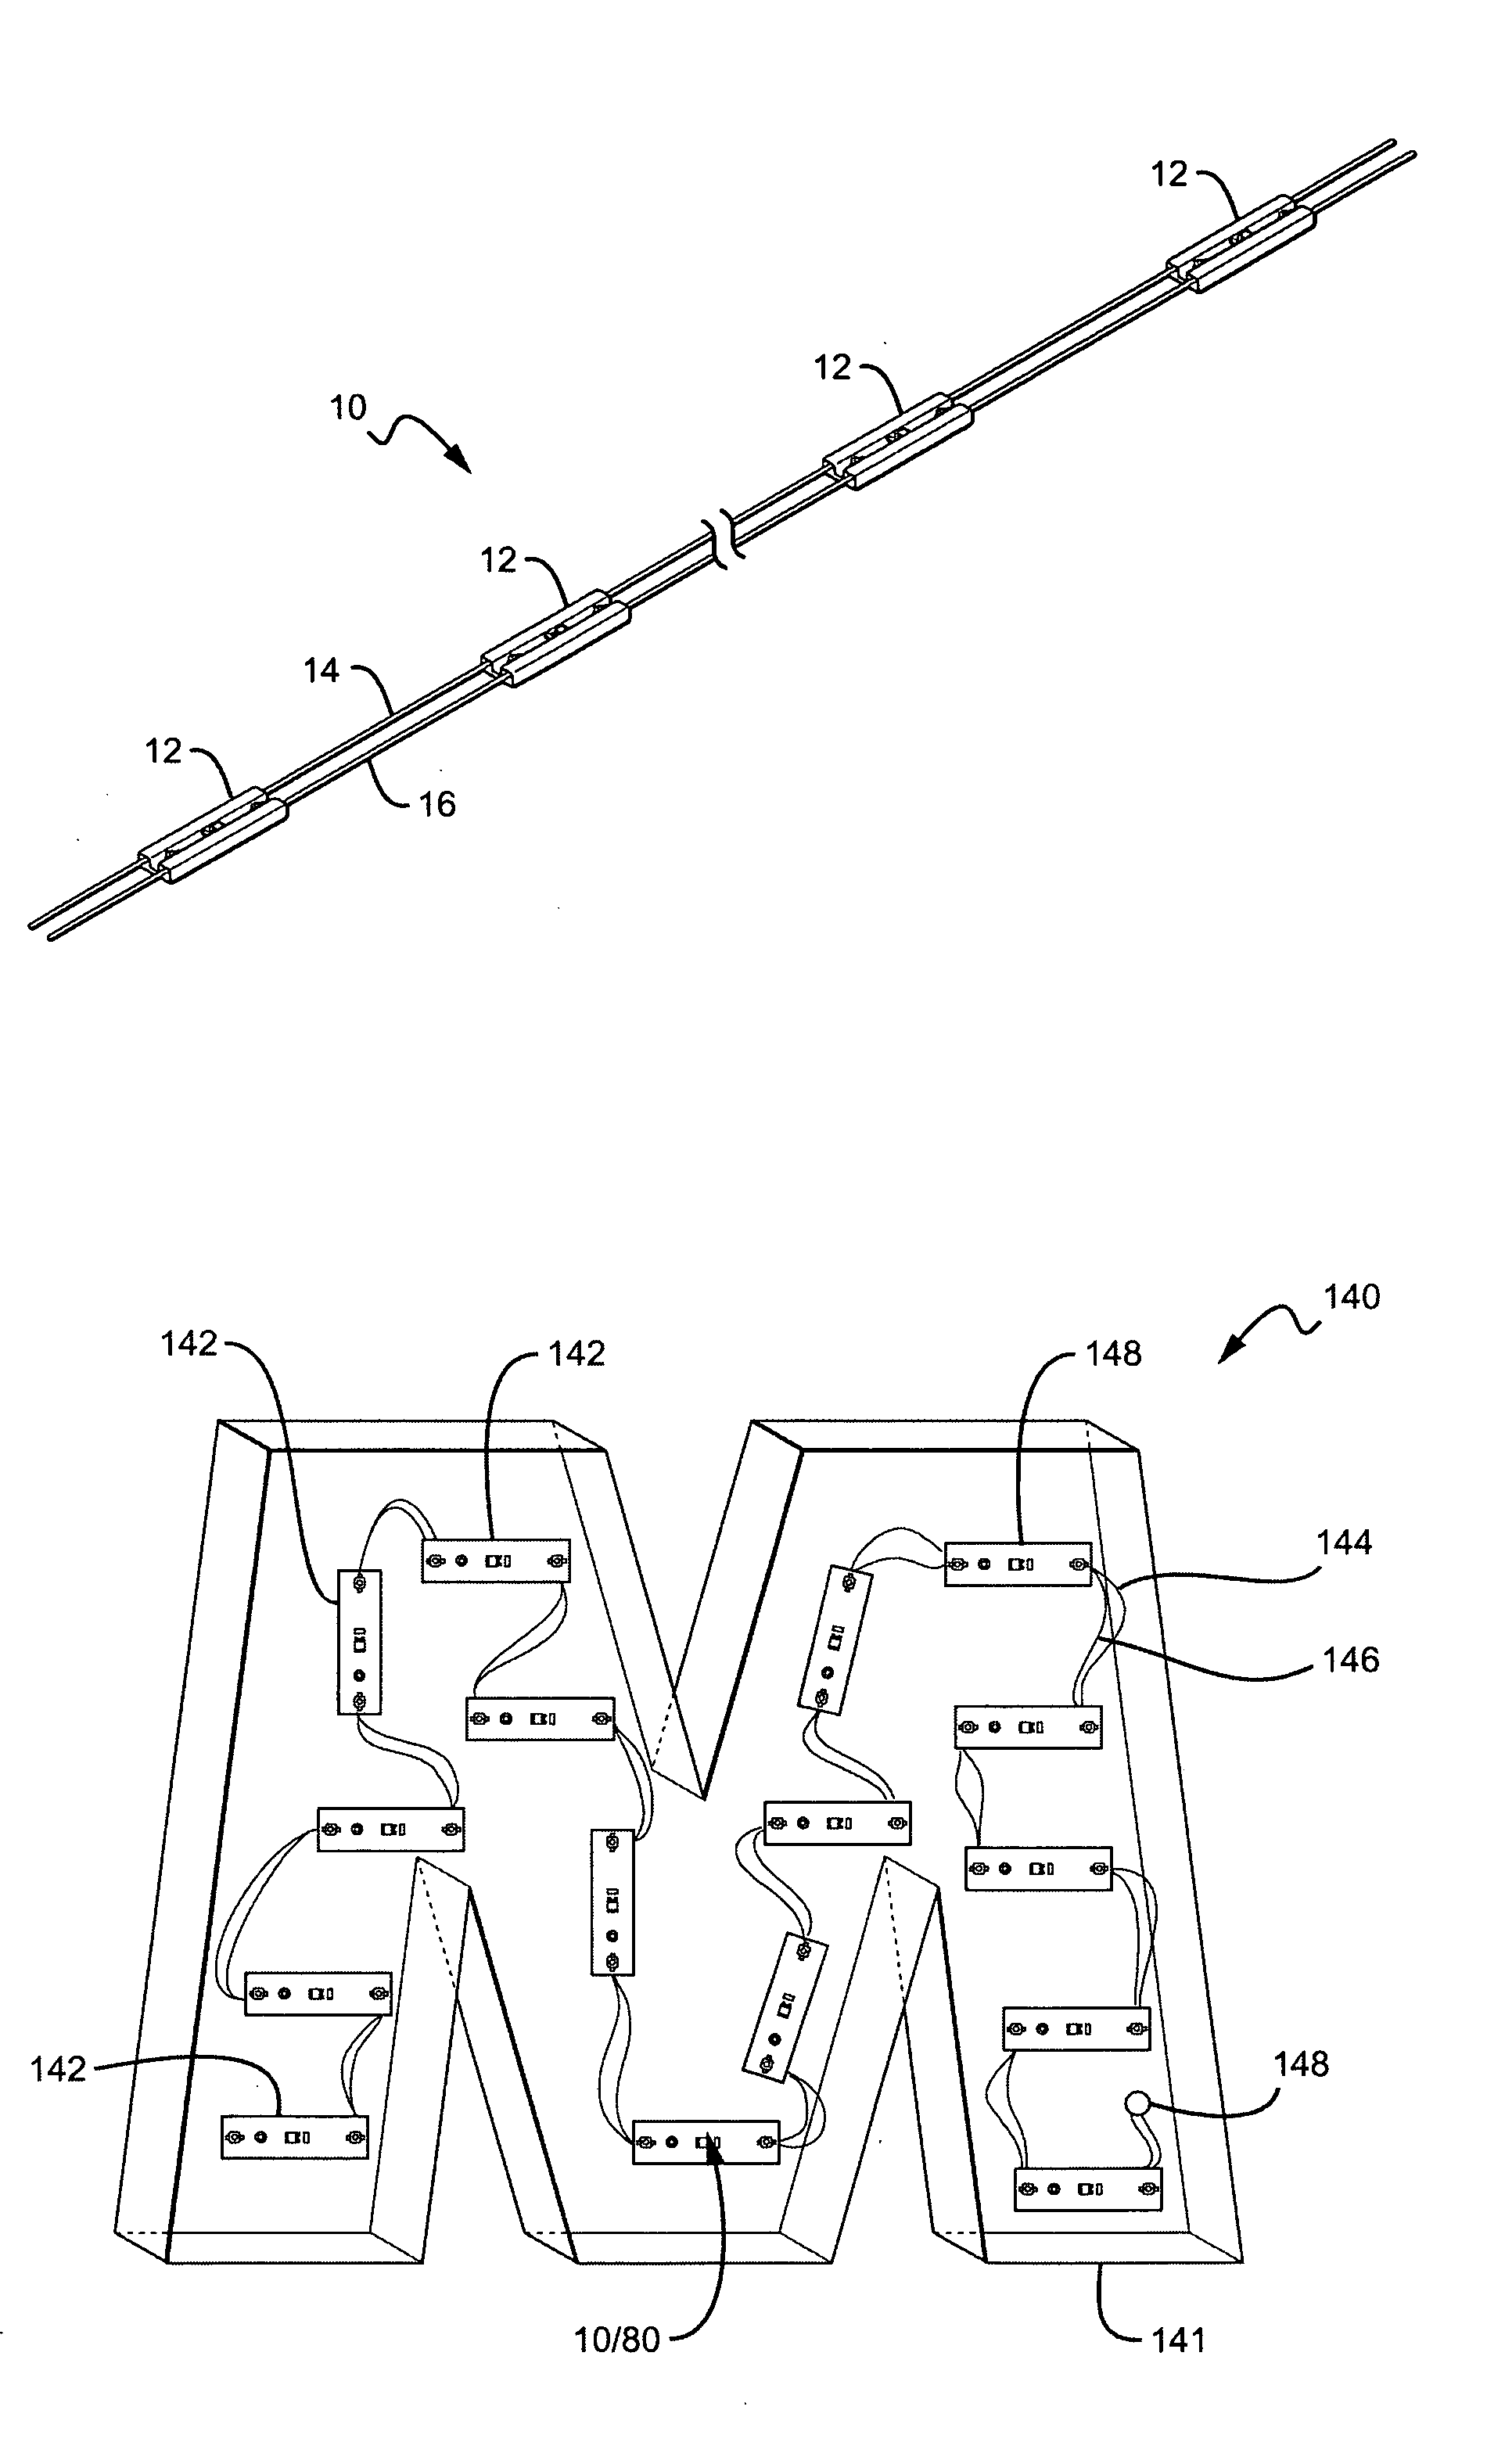 Channel letter lighting system using high output white light emitting diodes